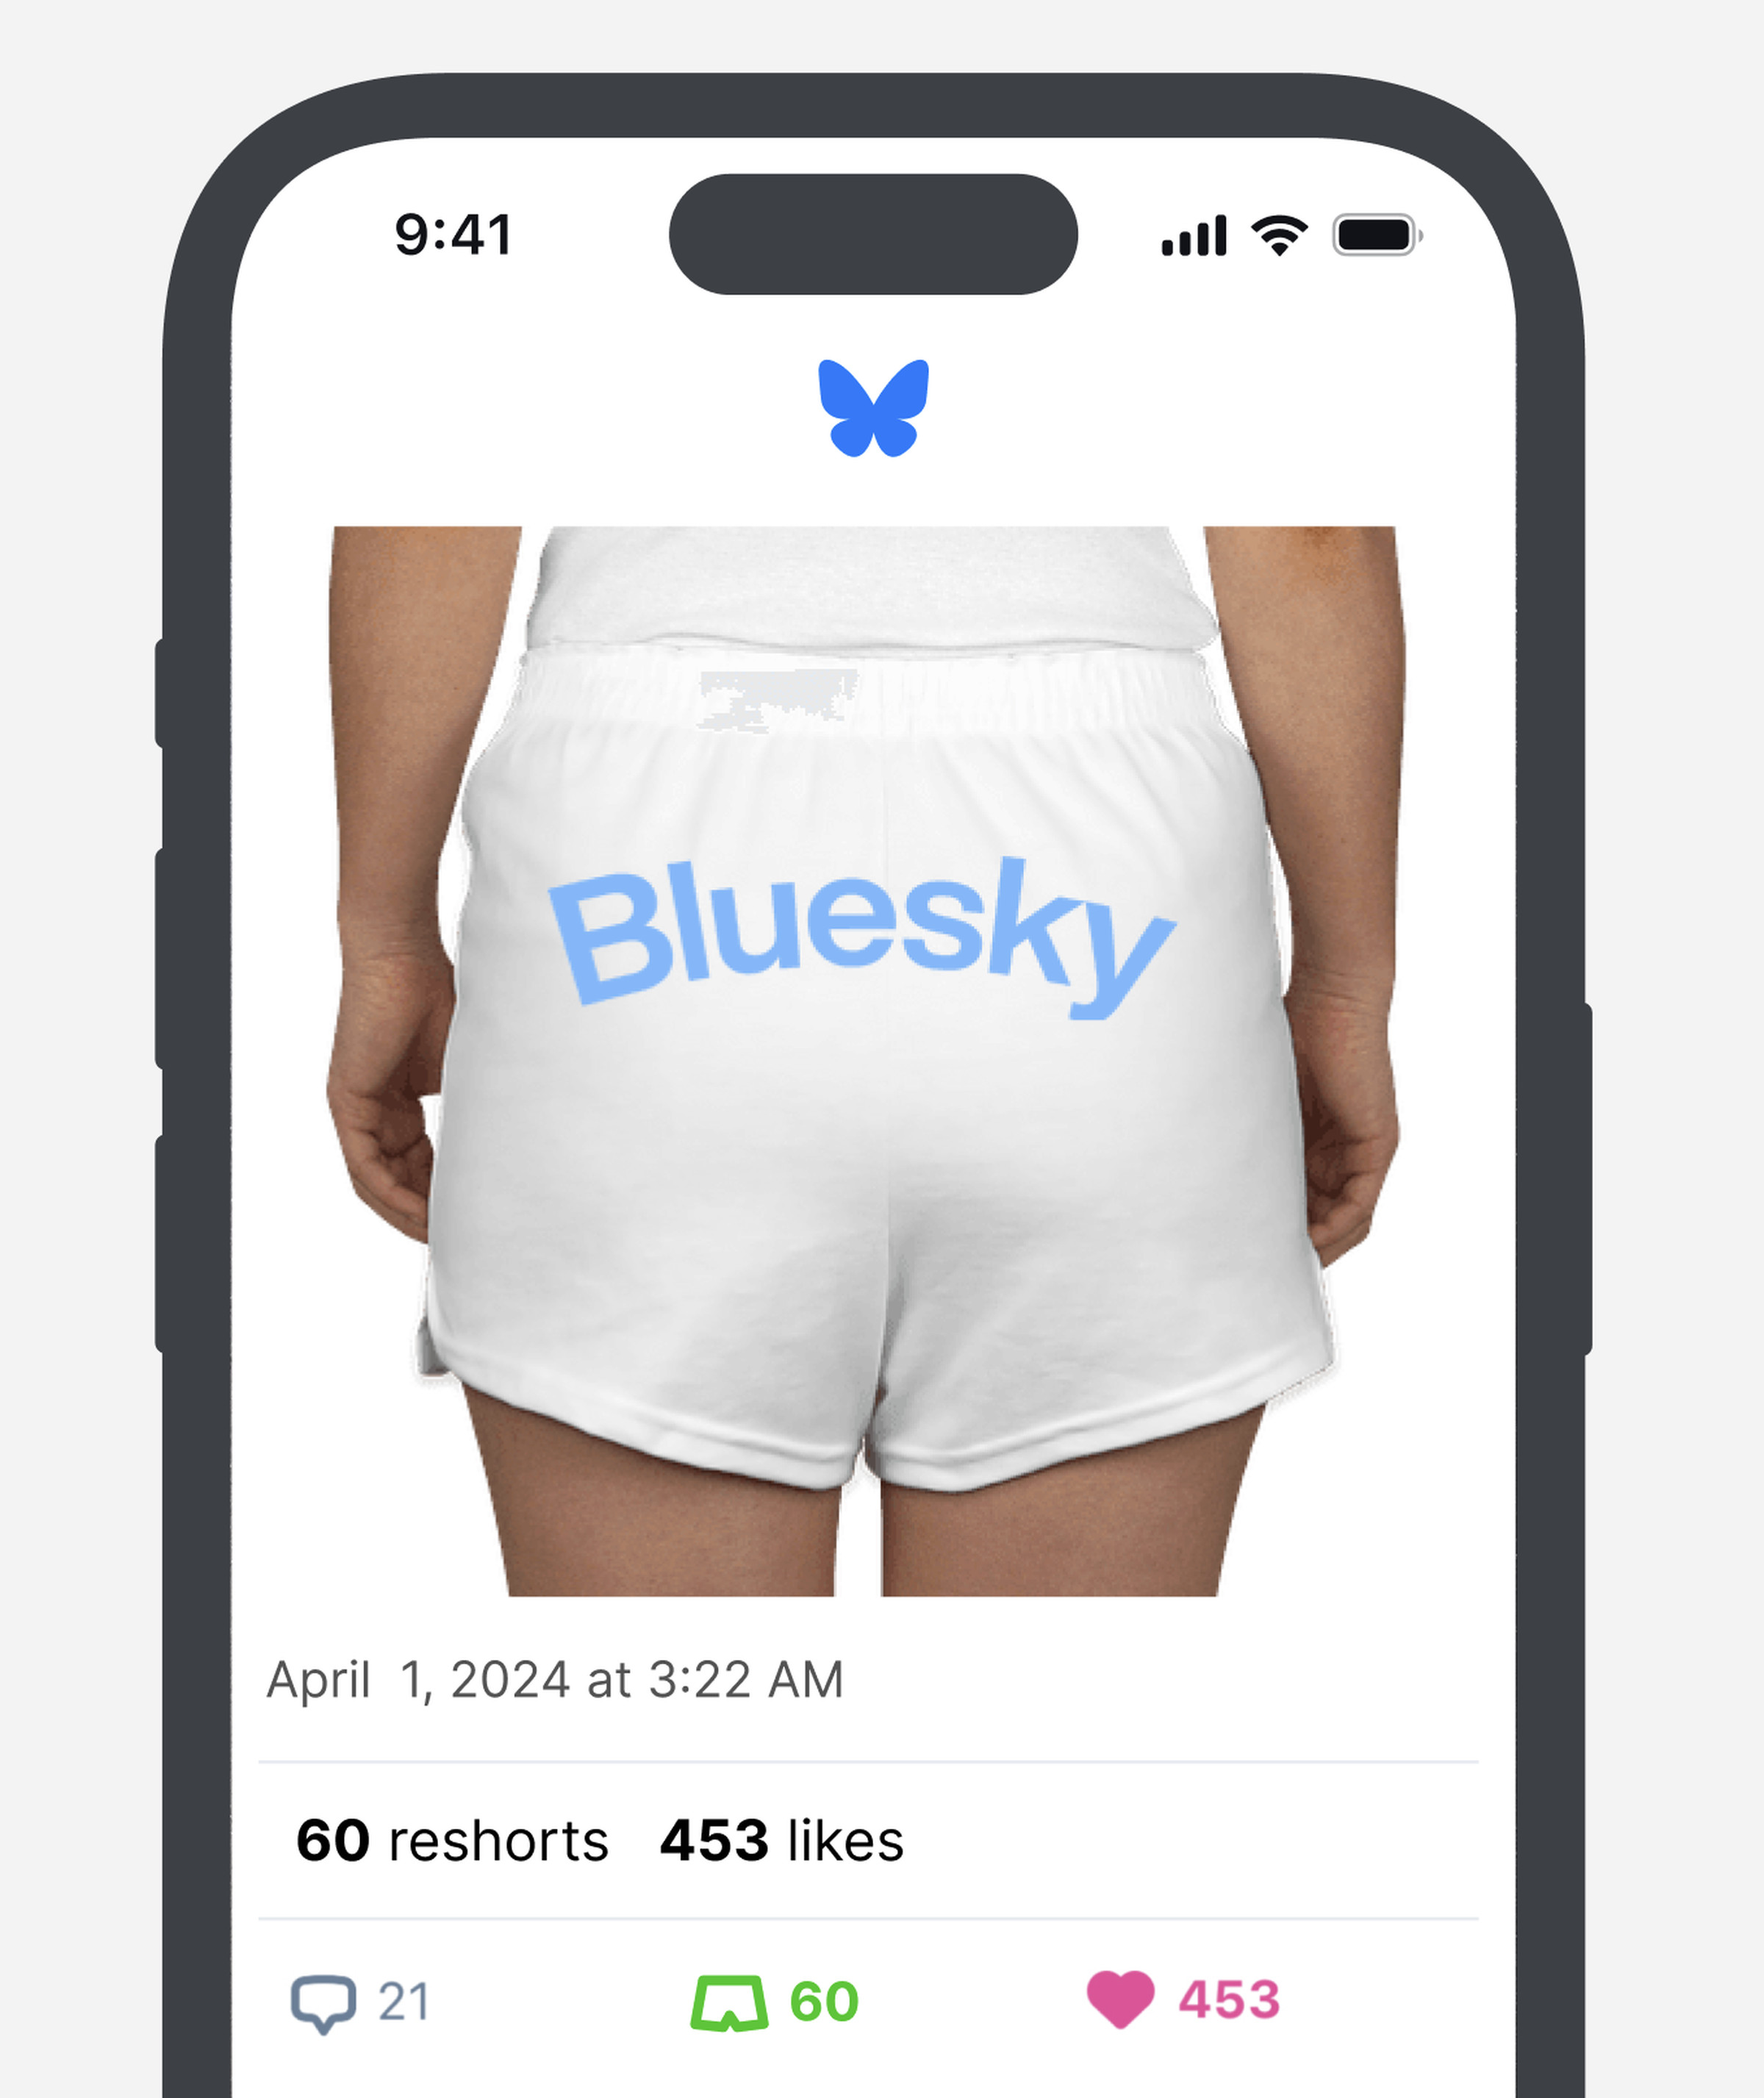 A screenshot of the ordering page for Bluesky shorts.